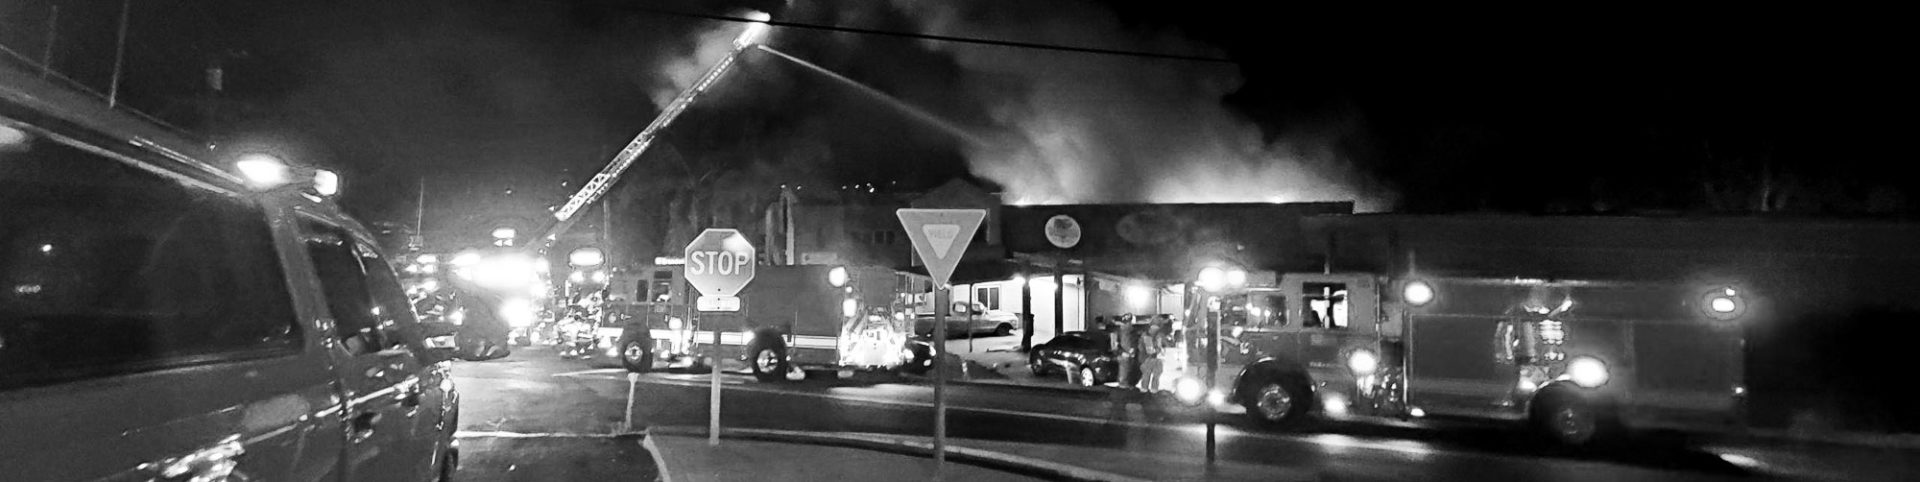 firetrucks pull in front of burning building at night